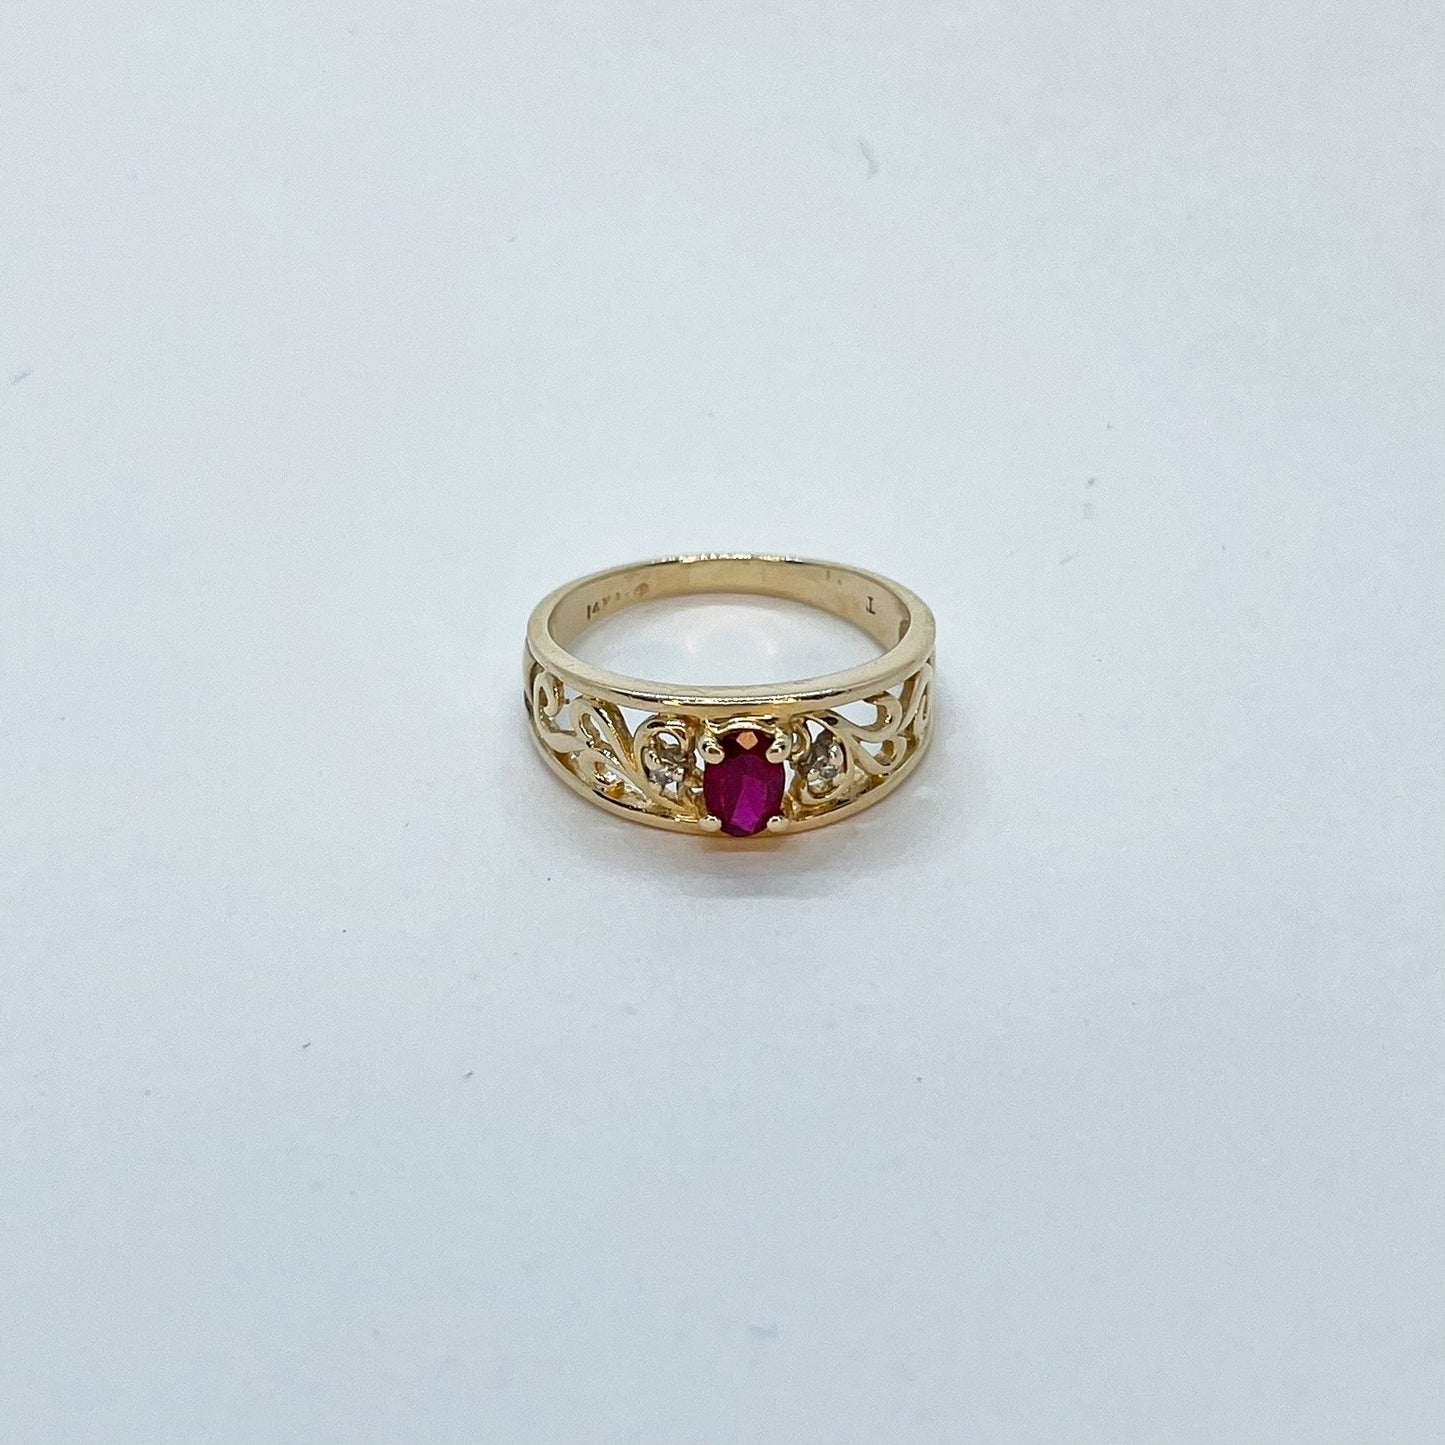 14K Oval Cut Ruby with Ornate Gold Band Design